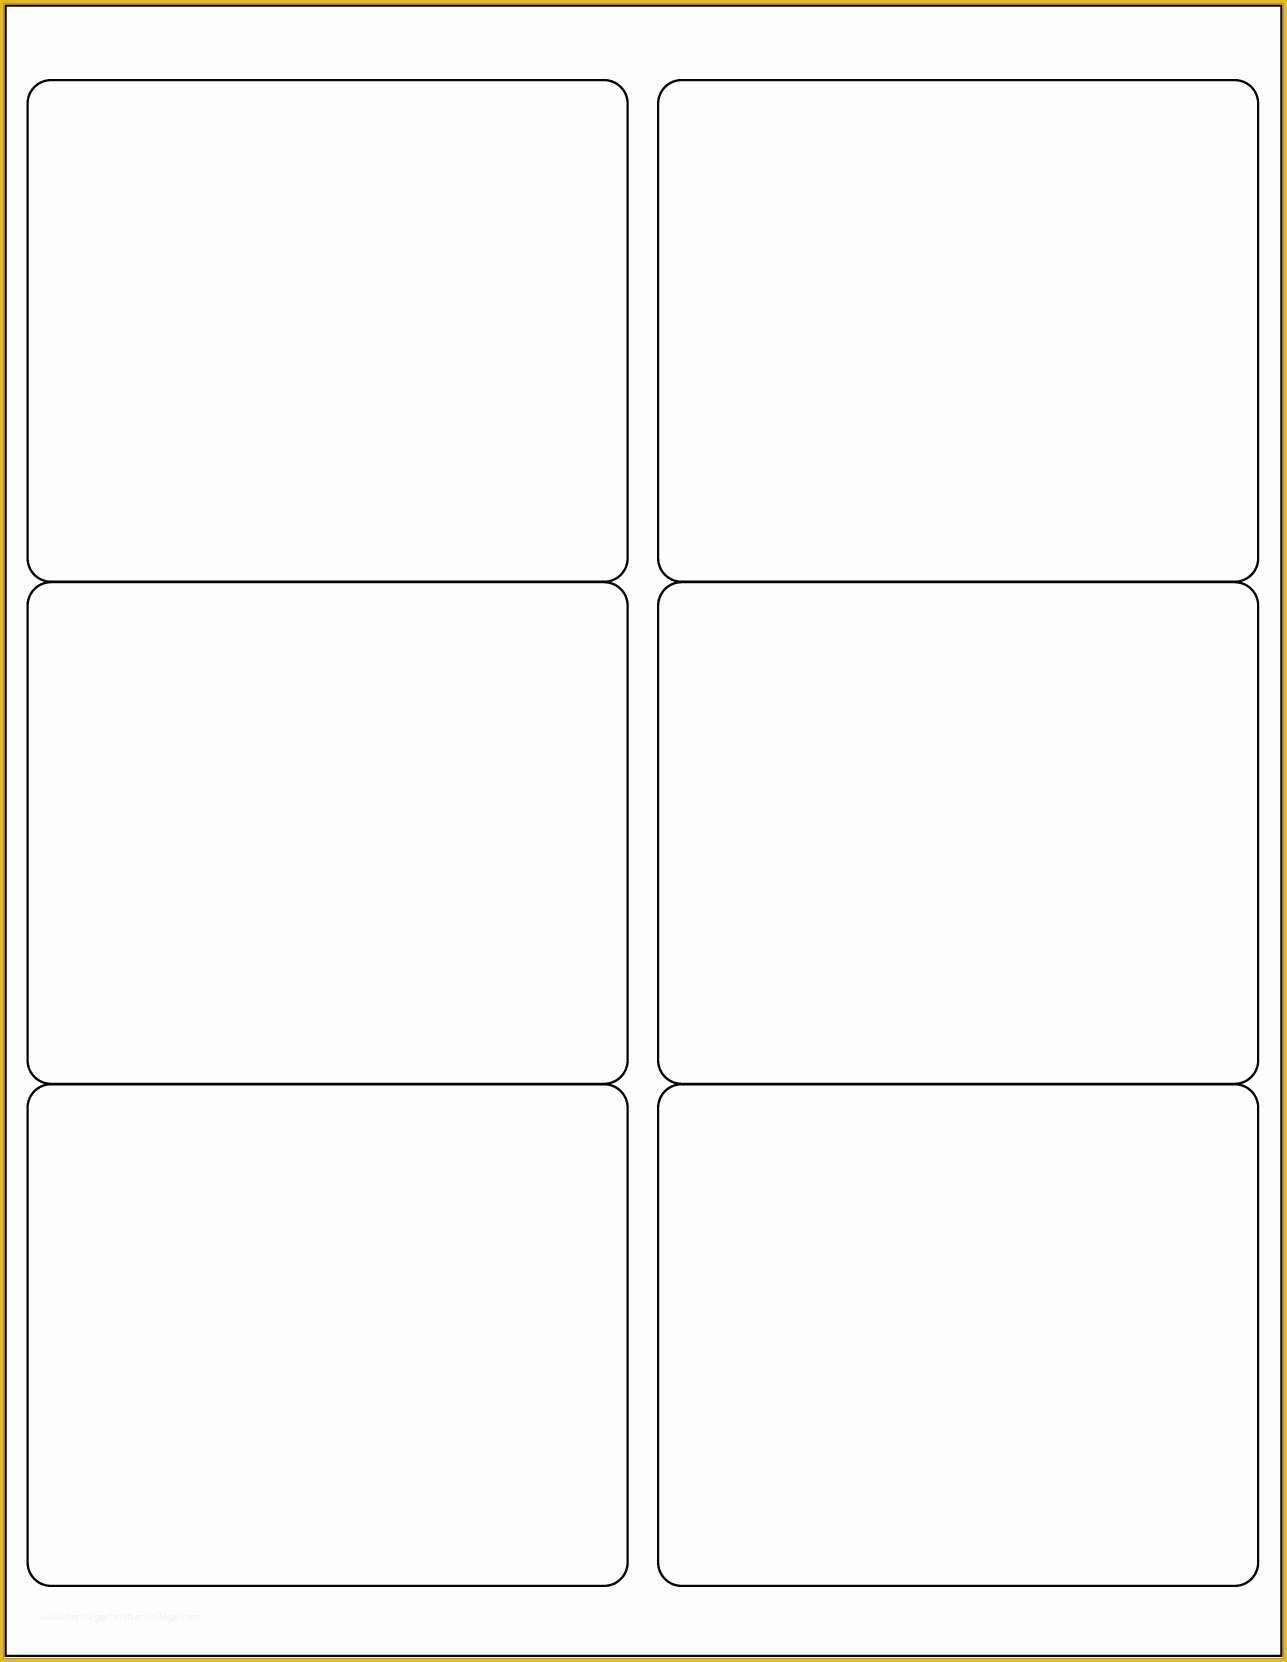 4x4-labels-template